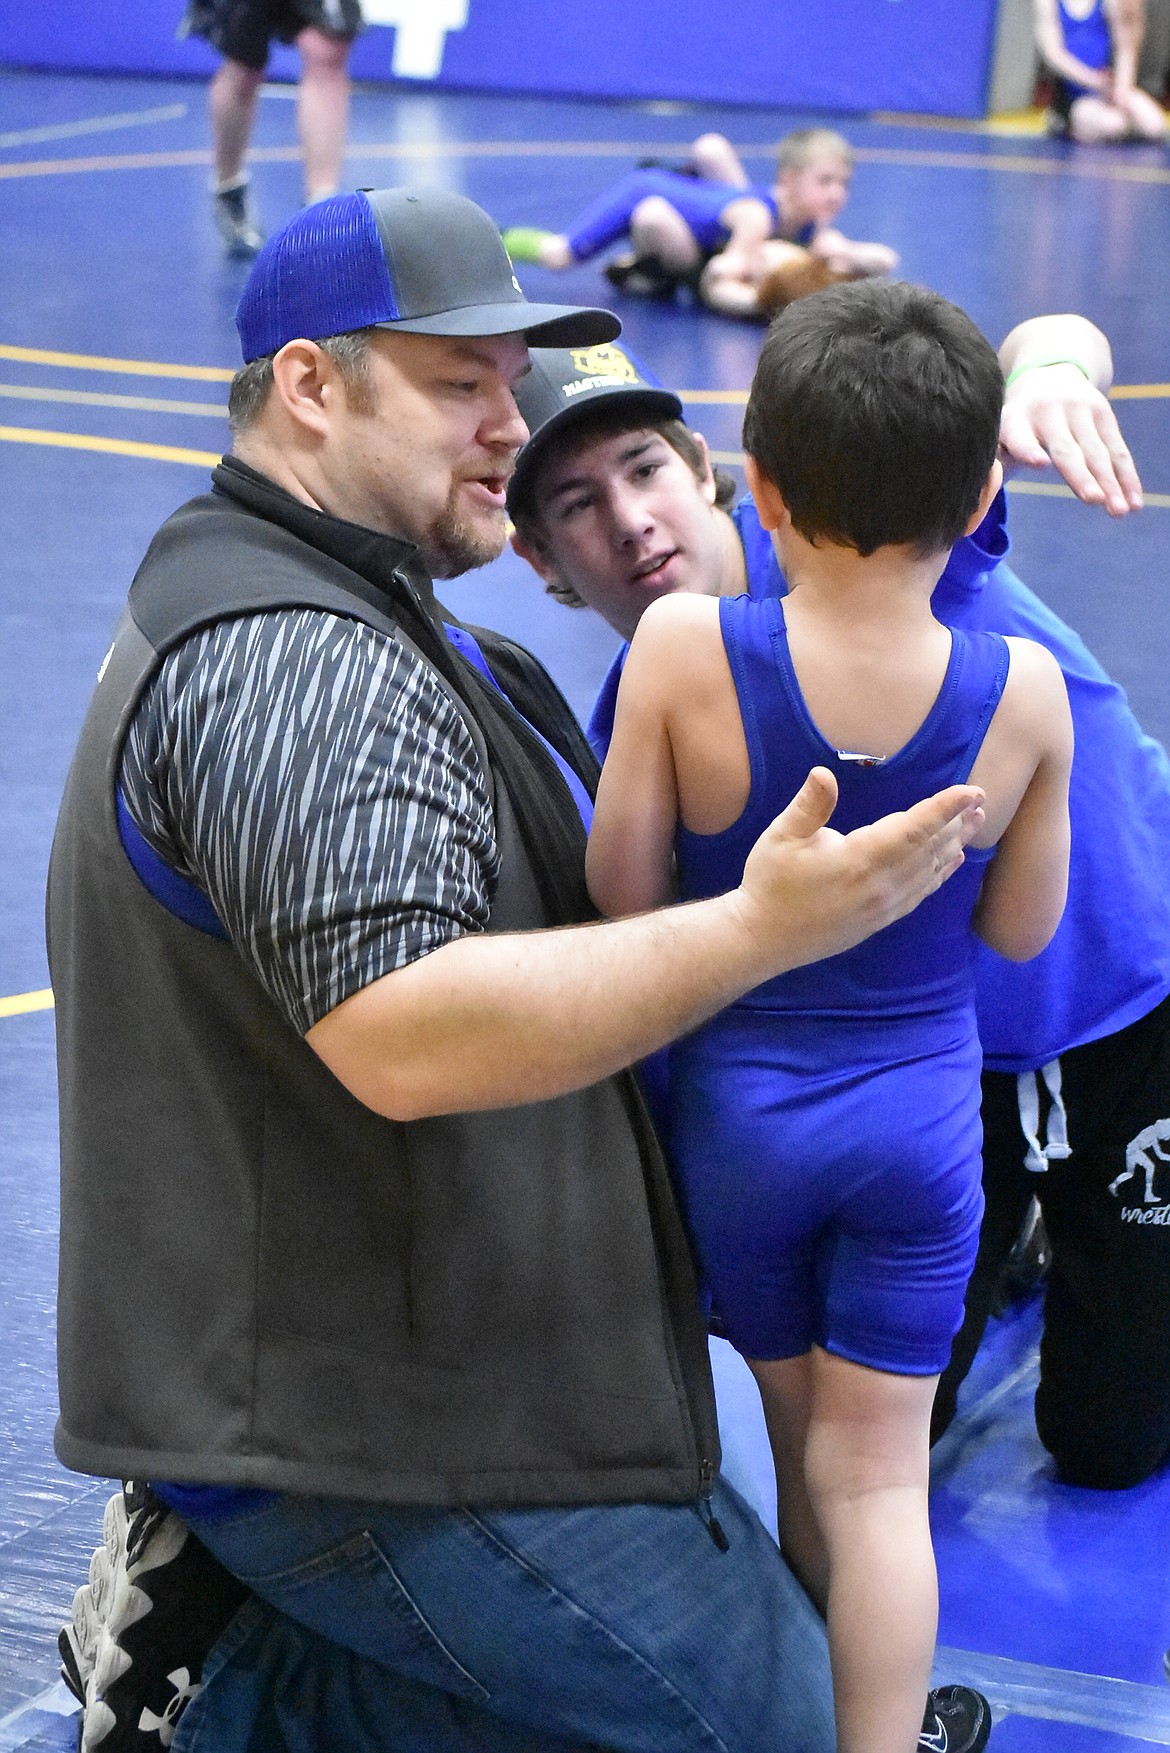 Coach Brian Barnes and referee Tucker Masters talk with Orion Roberts after a match, during the Kootenai Klassic, March 3.